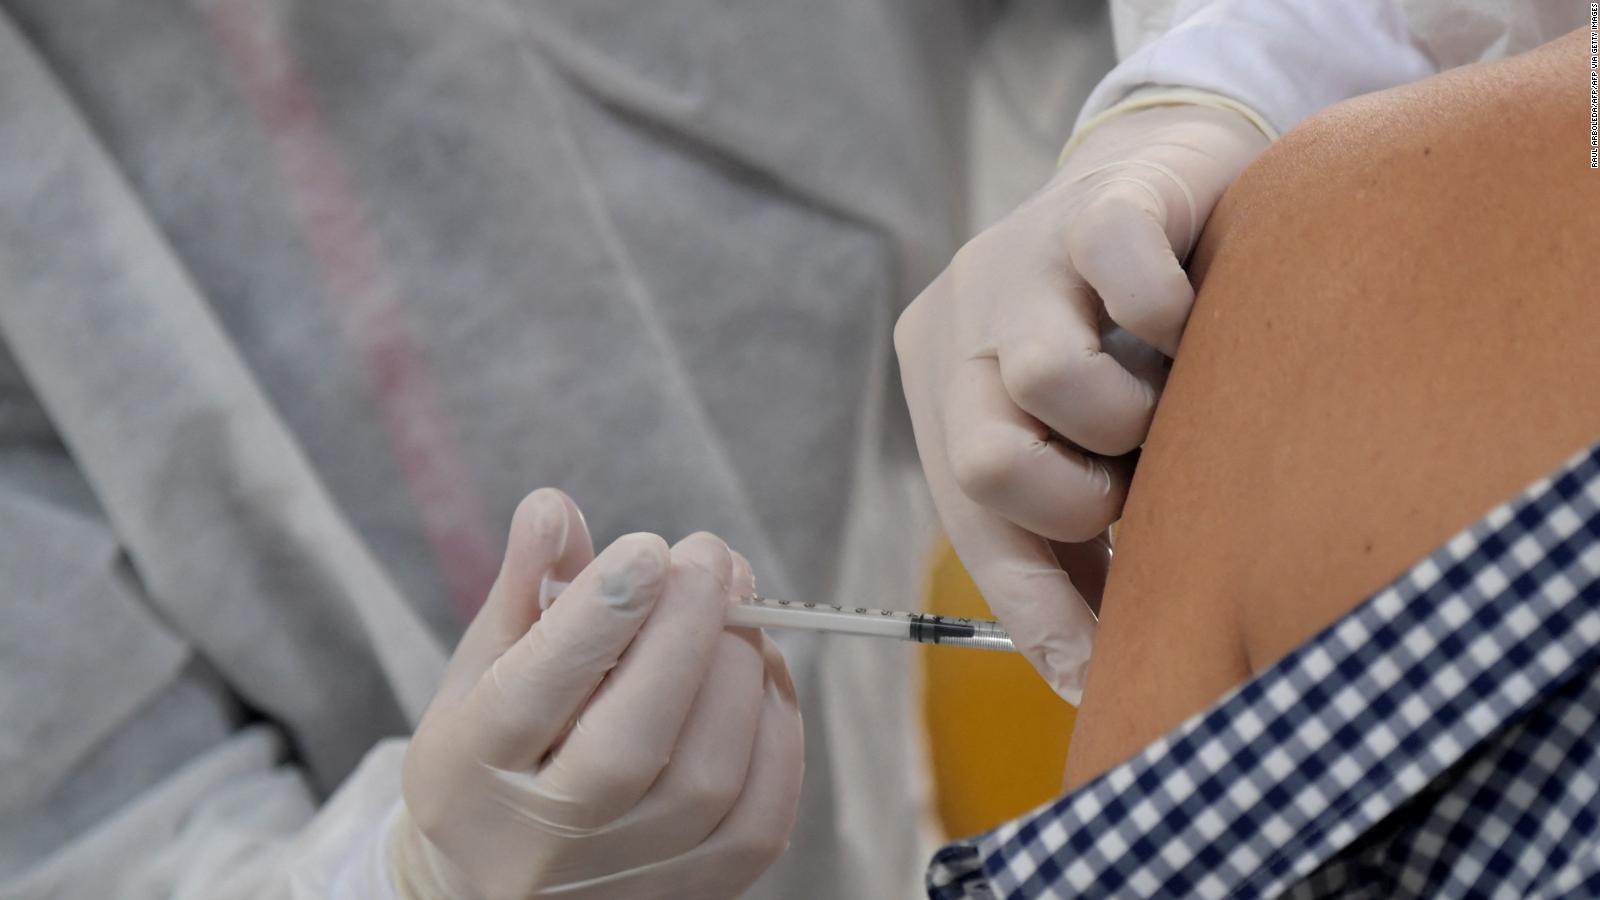 Teachers should be vaccinated against covid, says Fauci